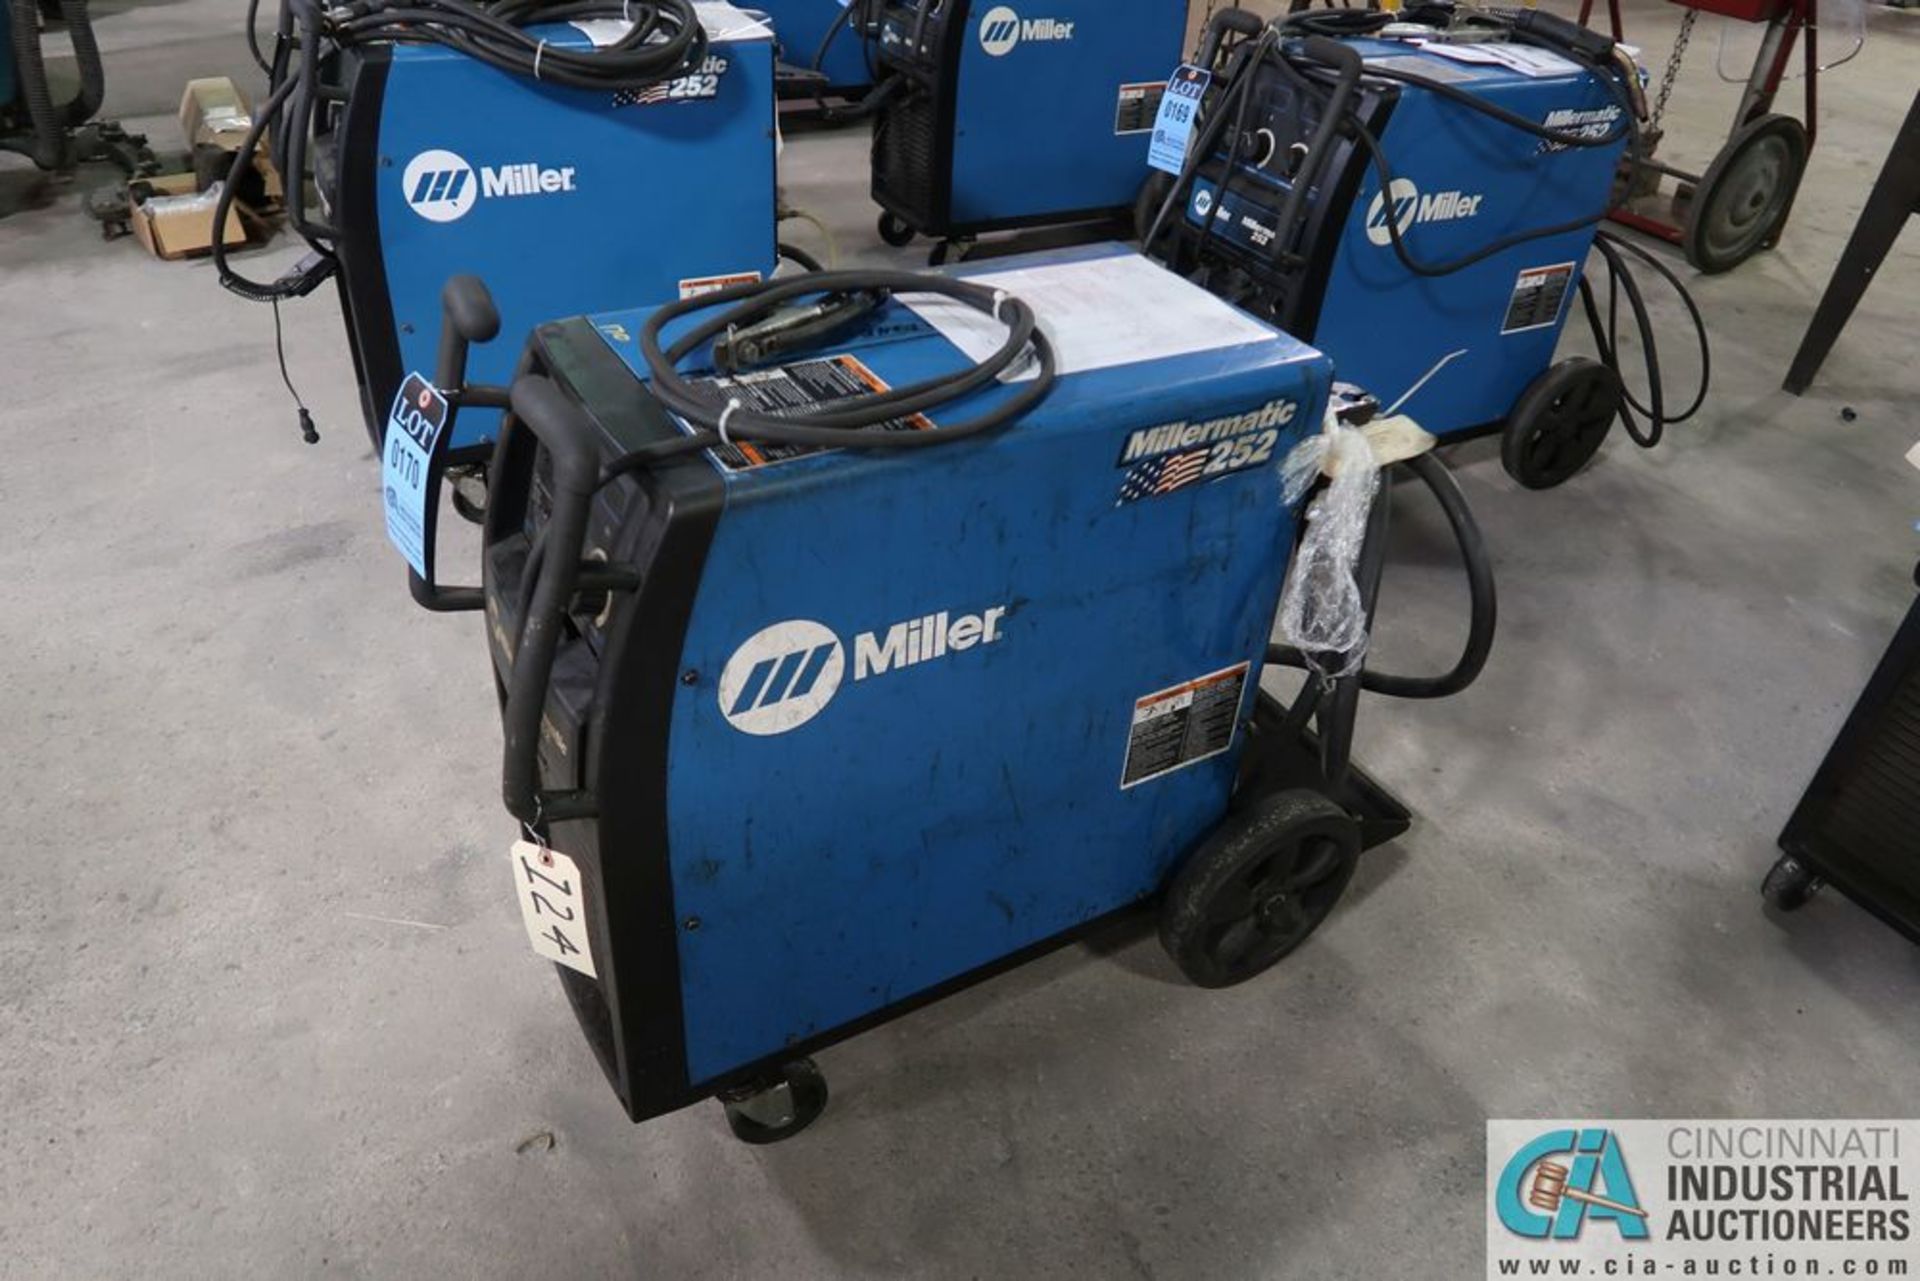 250 AMP MILLER MODEL MILLERMATIC 252 MIG WELDING POWER SOURCE; S/N MD281328N, WITH BUILT-IN WIRE - Image 3 of 7